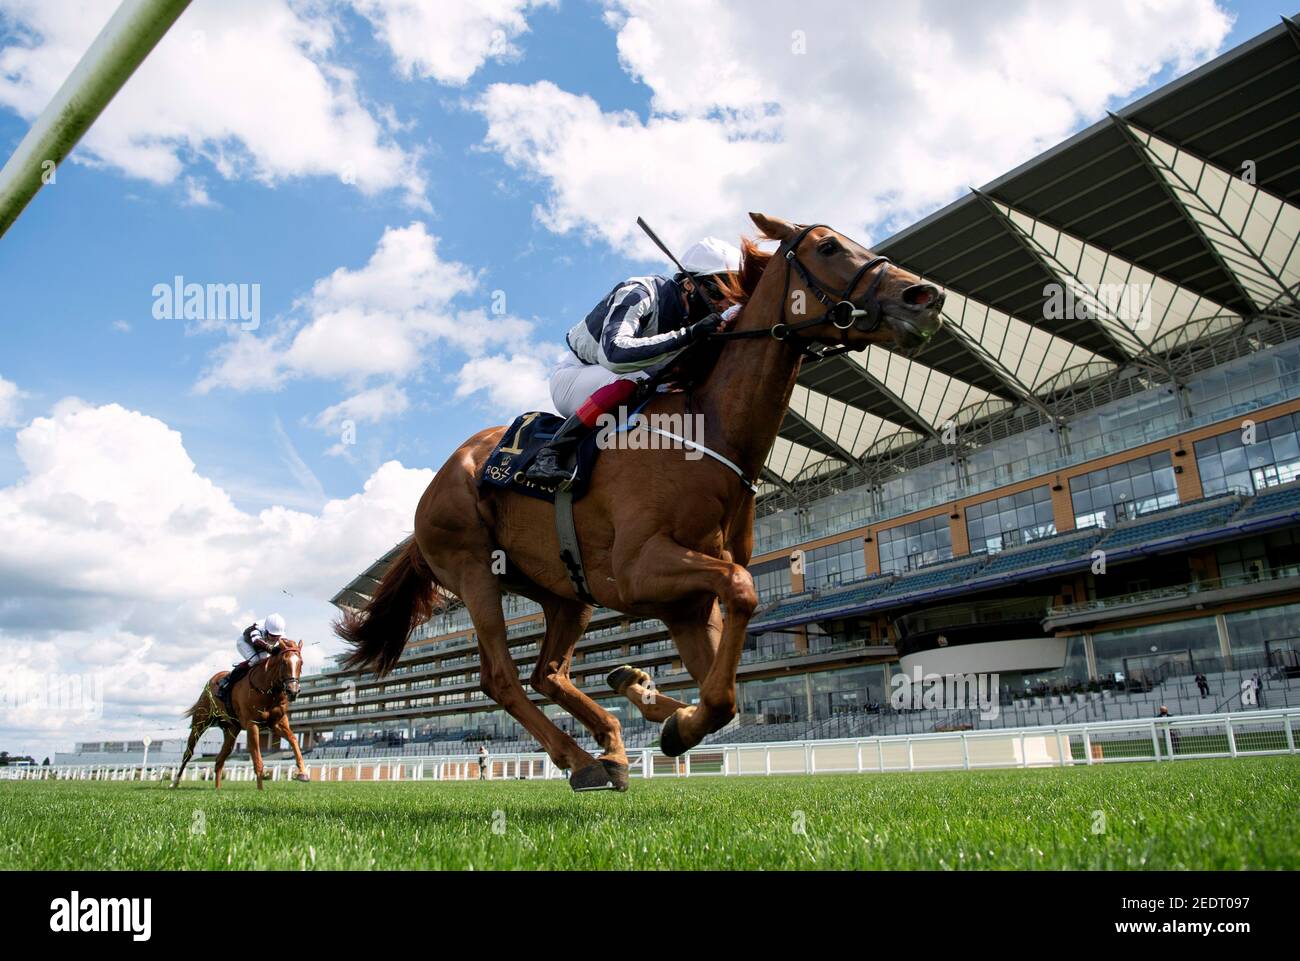 Horse Racing - Royal Ascot - Ascot Racecourse, Ascot, Britain - June 20, 2020 Frankie Dettori riding Alpine Star wins the 14:25 Coronation Stakes, as racing resumed behind closed doors after the outbreak of the coronavirus disease (COVID-19) Edward Whitaker/Pool via REUTERS Stock Photo